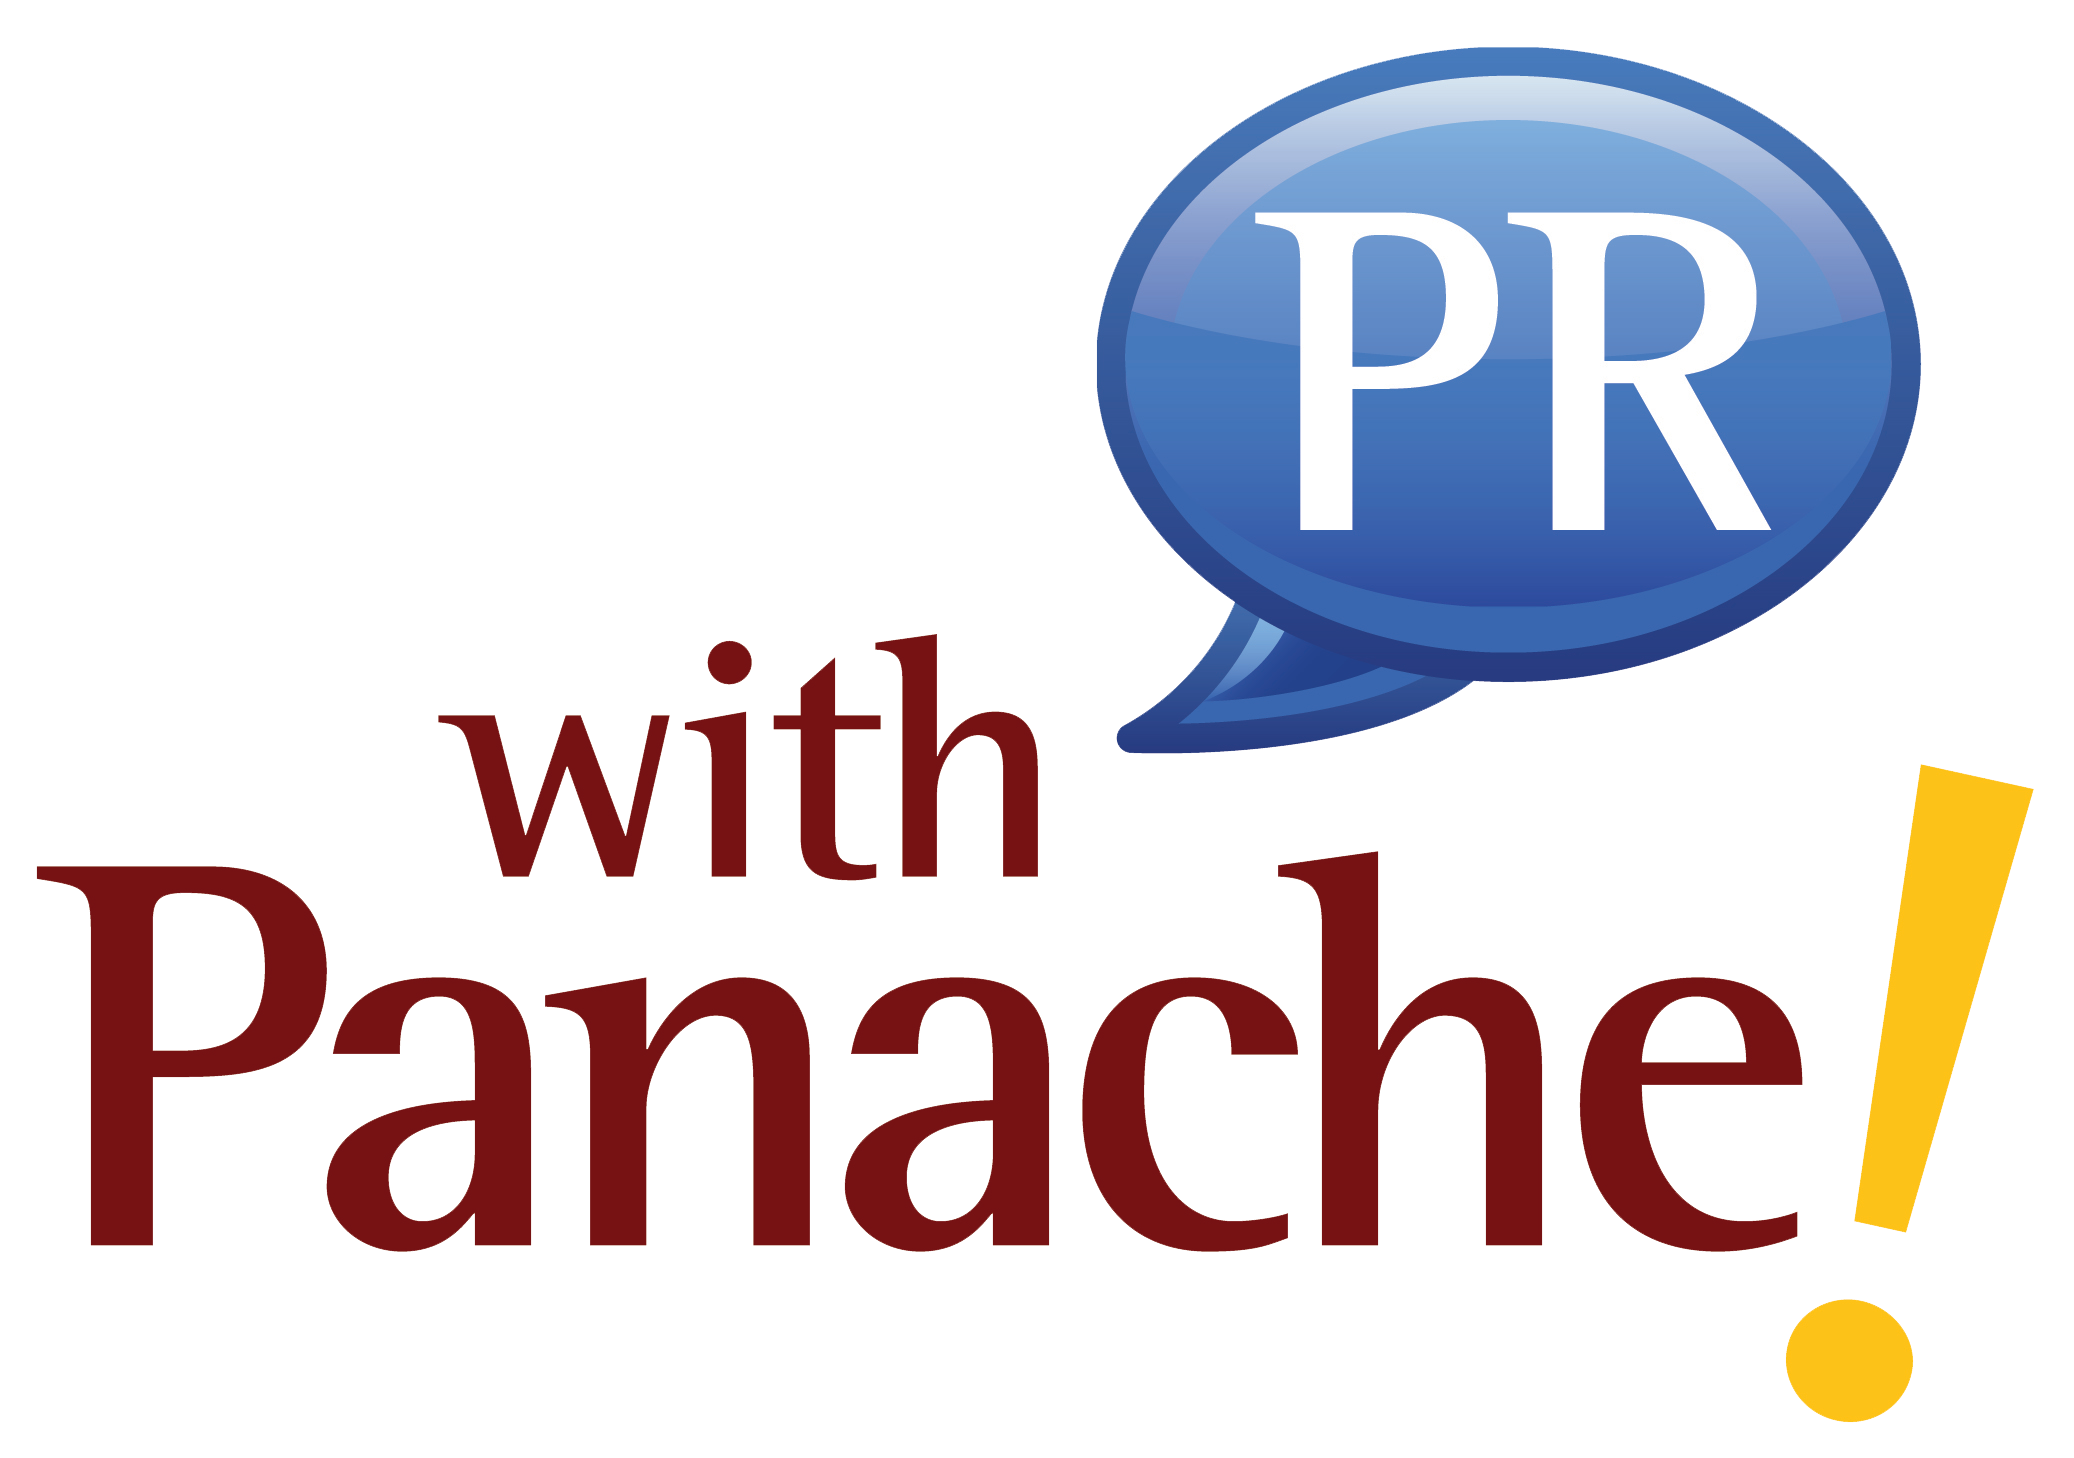 Join PR with Panache! to honor Dr. Karen Billings at TCEA